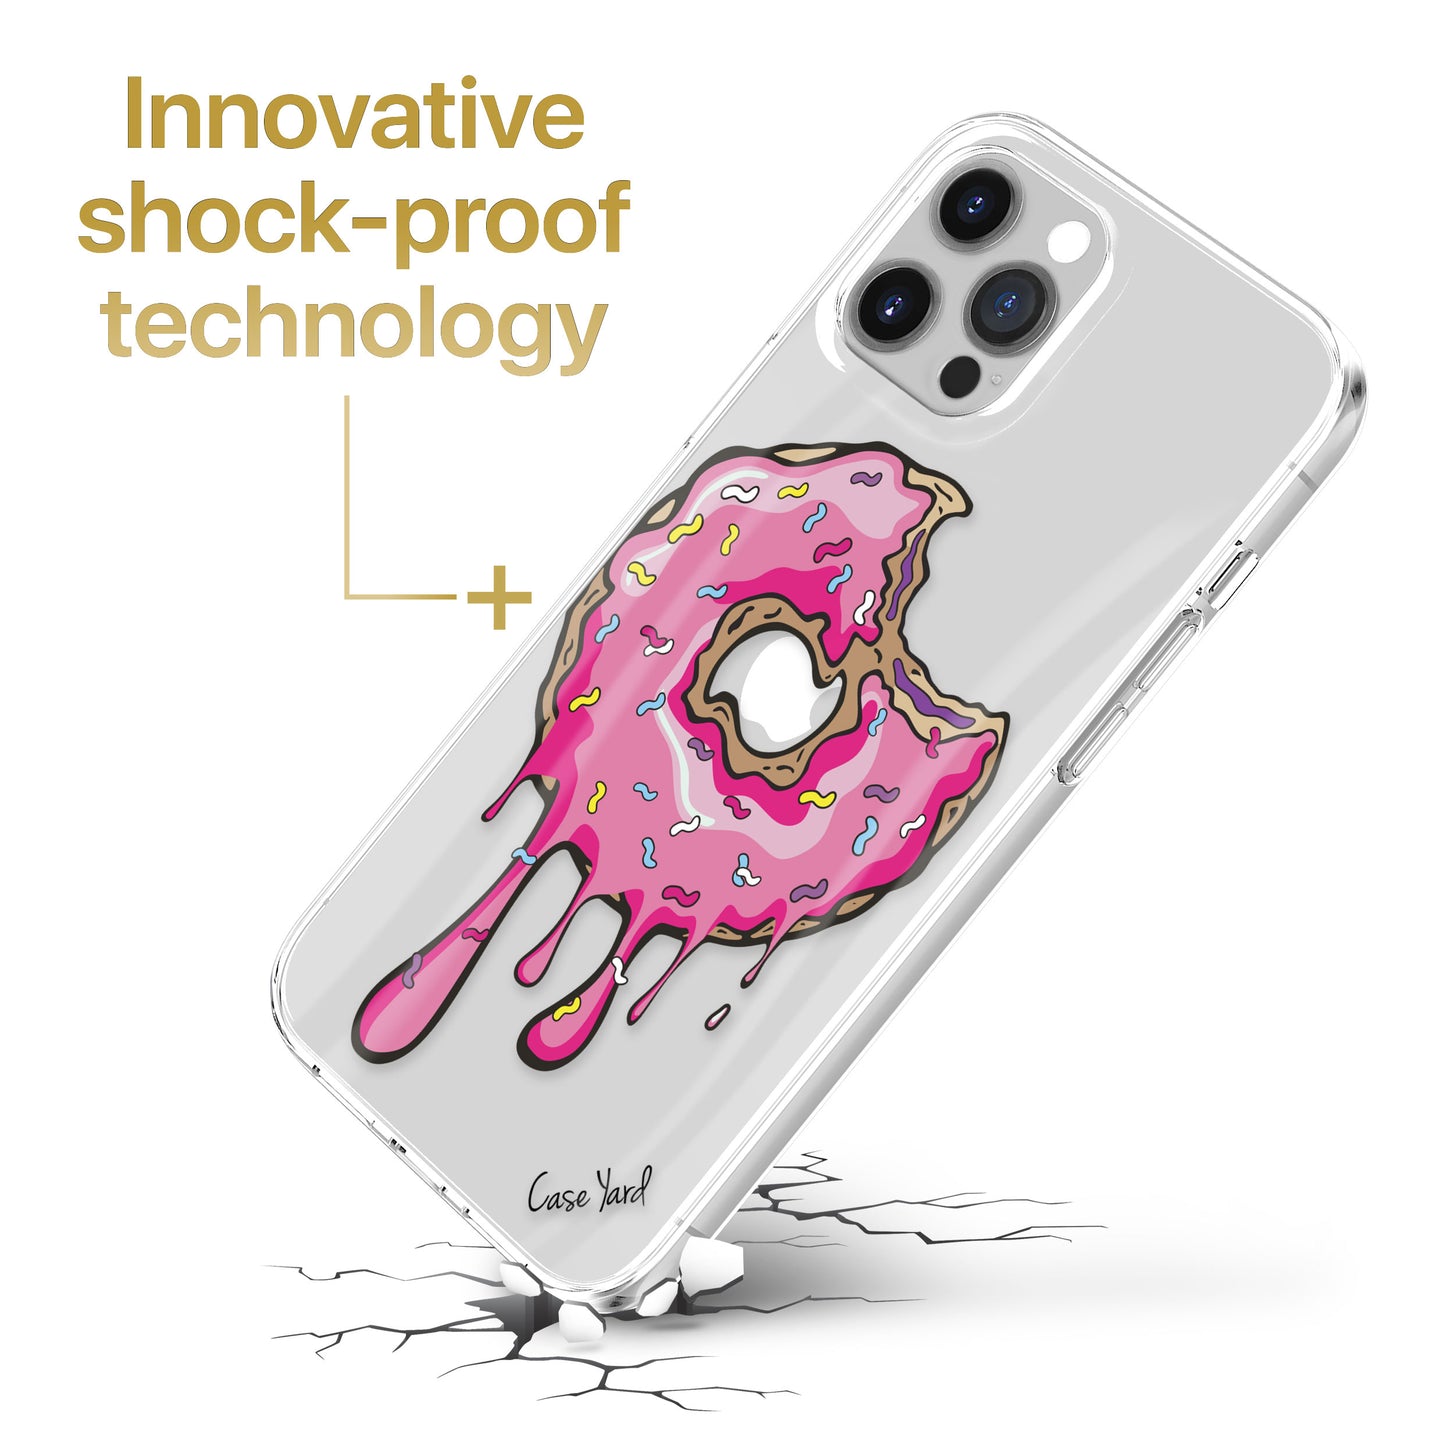 TPU Clear case with (Dripping Donut) Design for iPhone & Samsung Phones